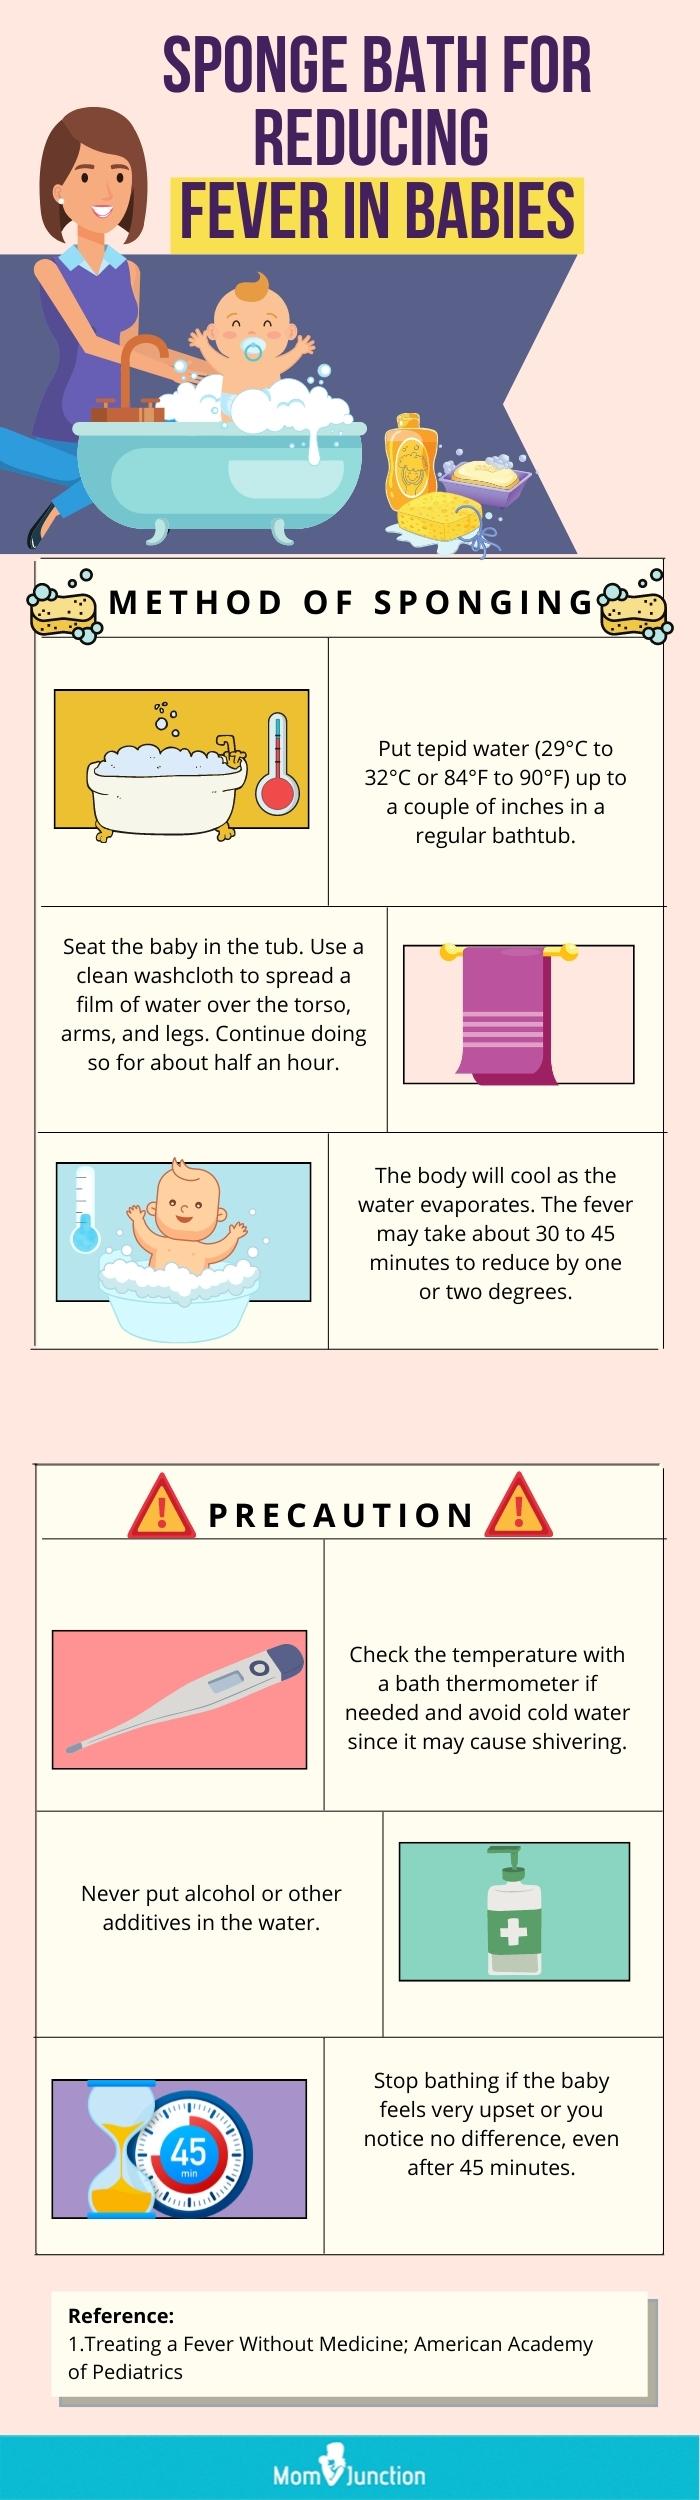 sponge bath for reducing fever in babies (infographic)